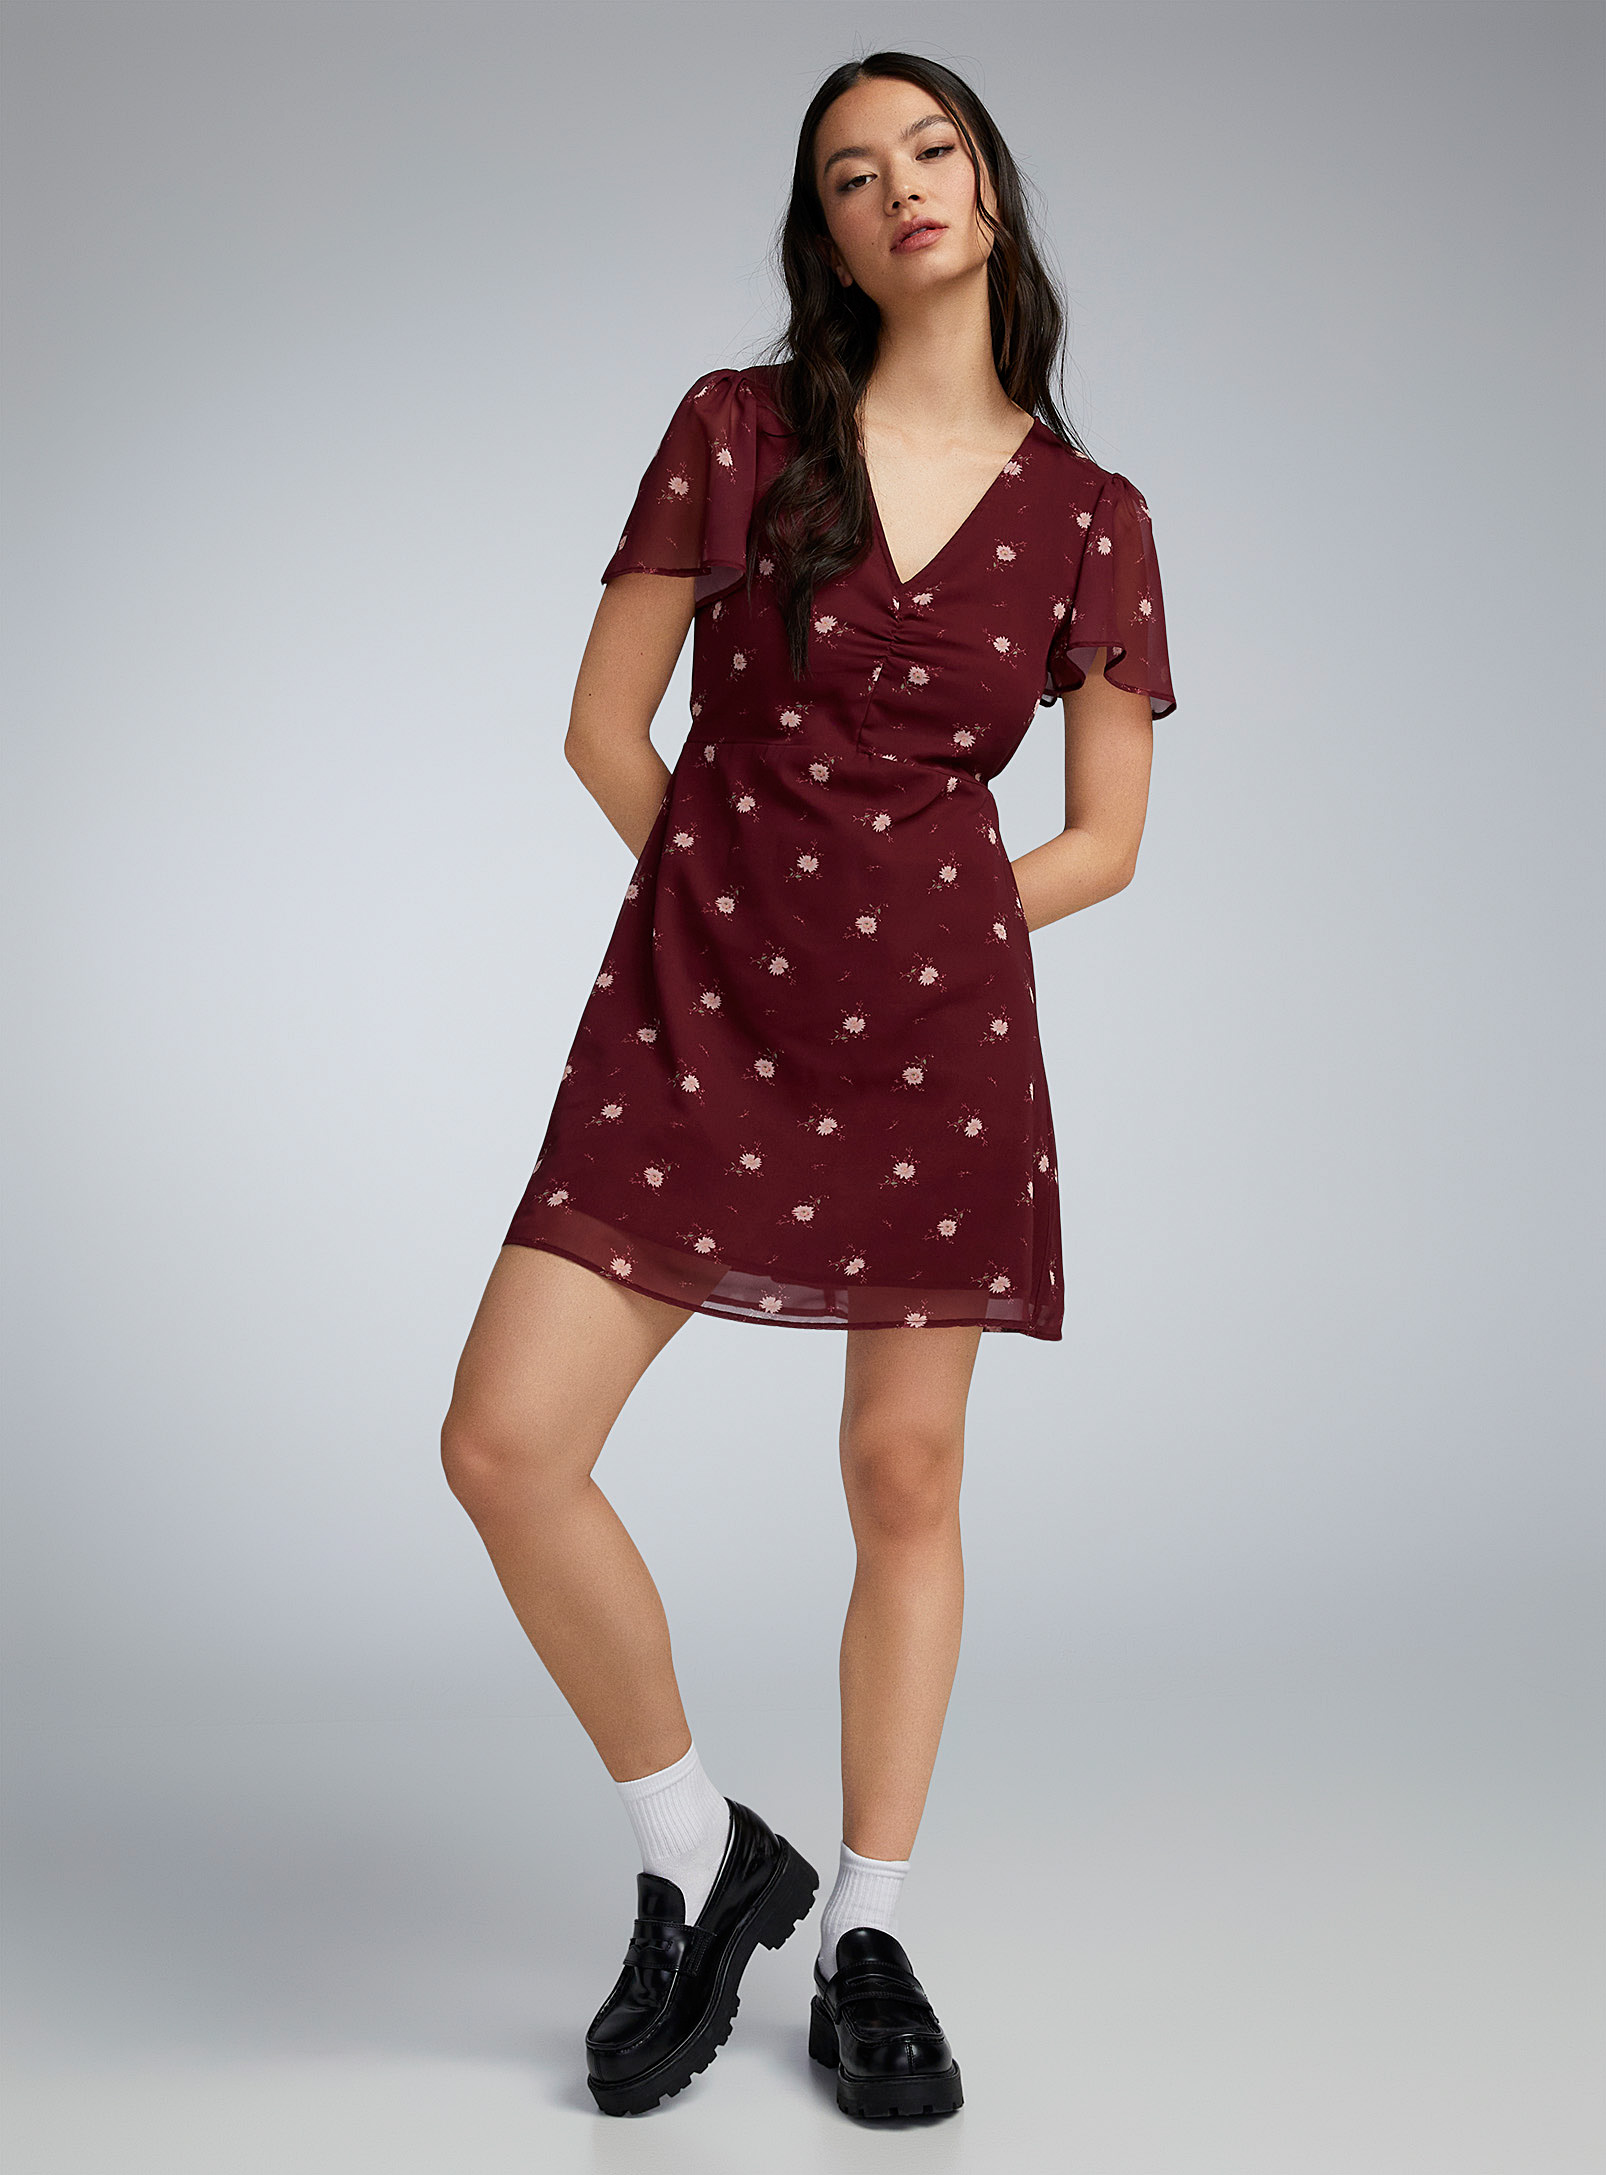 Twik Ruched Chiffon V-neck Dress In Patterned Red